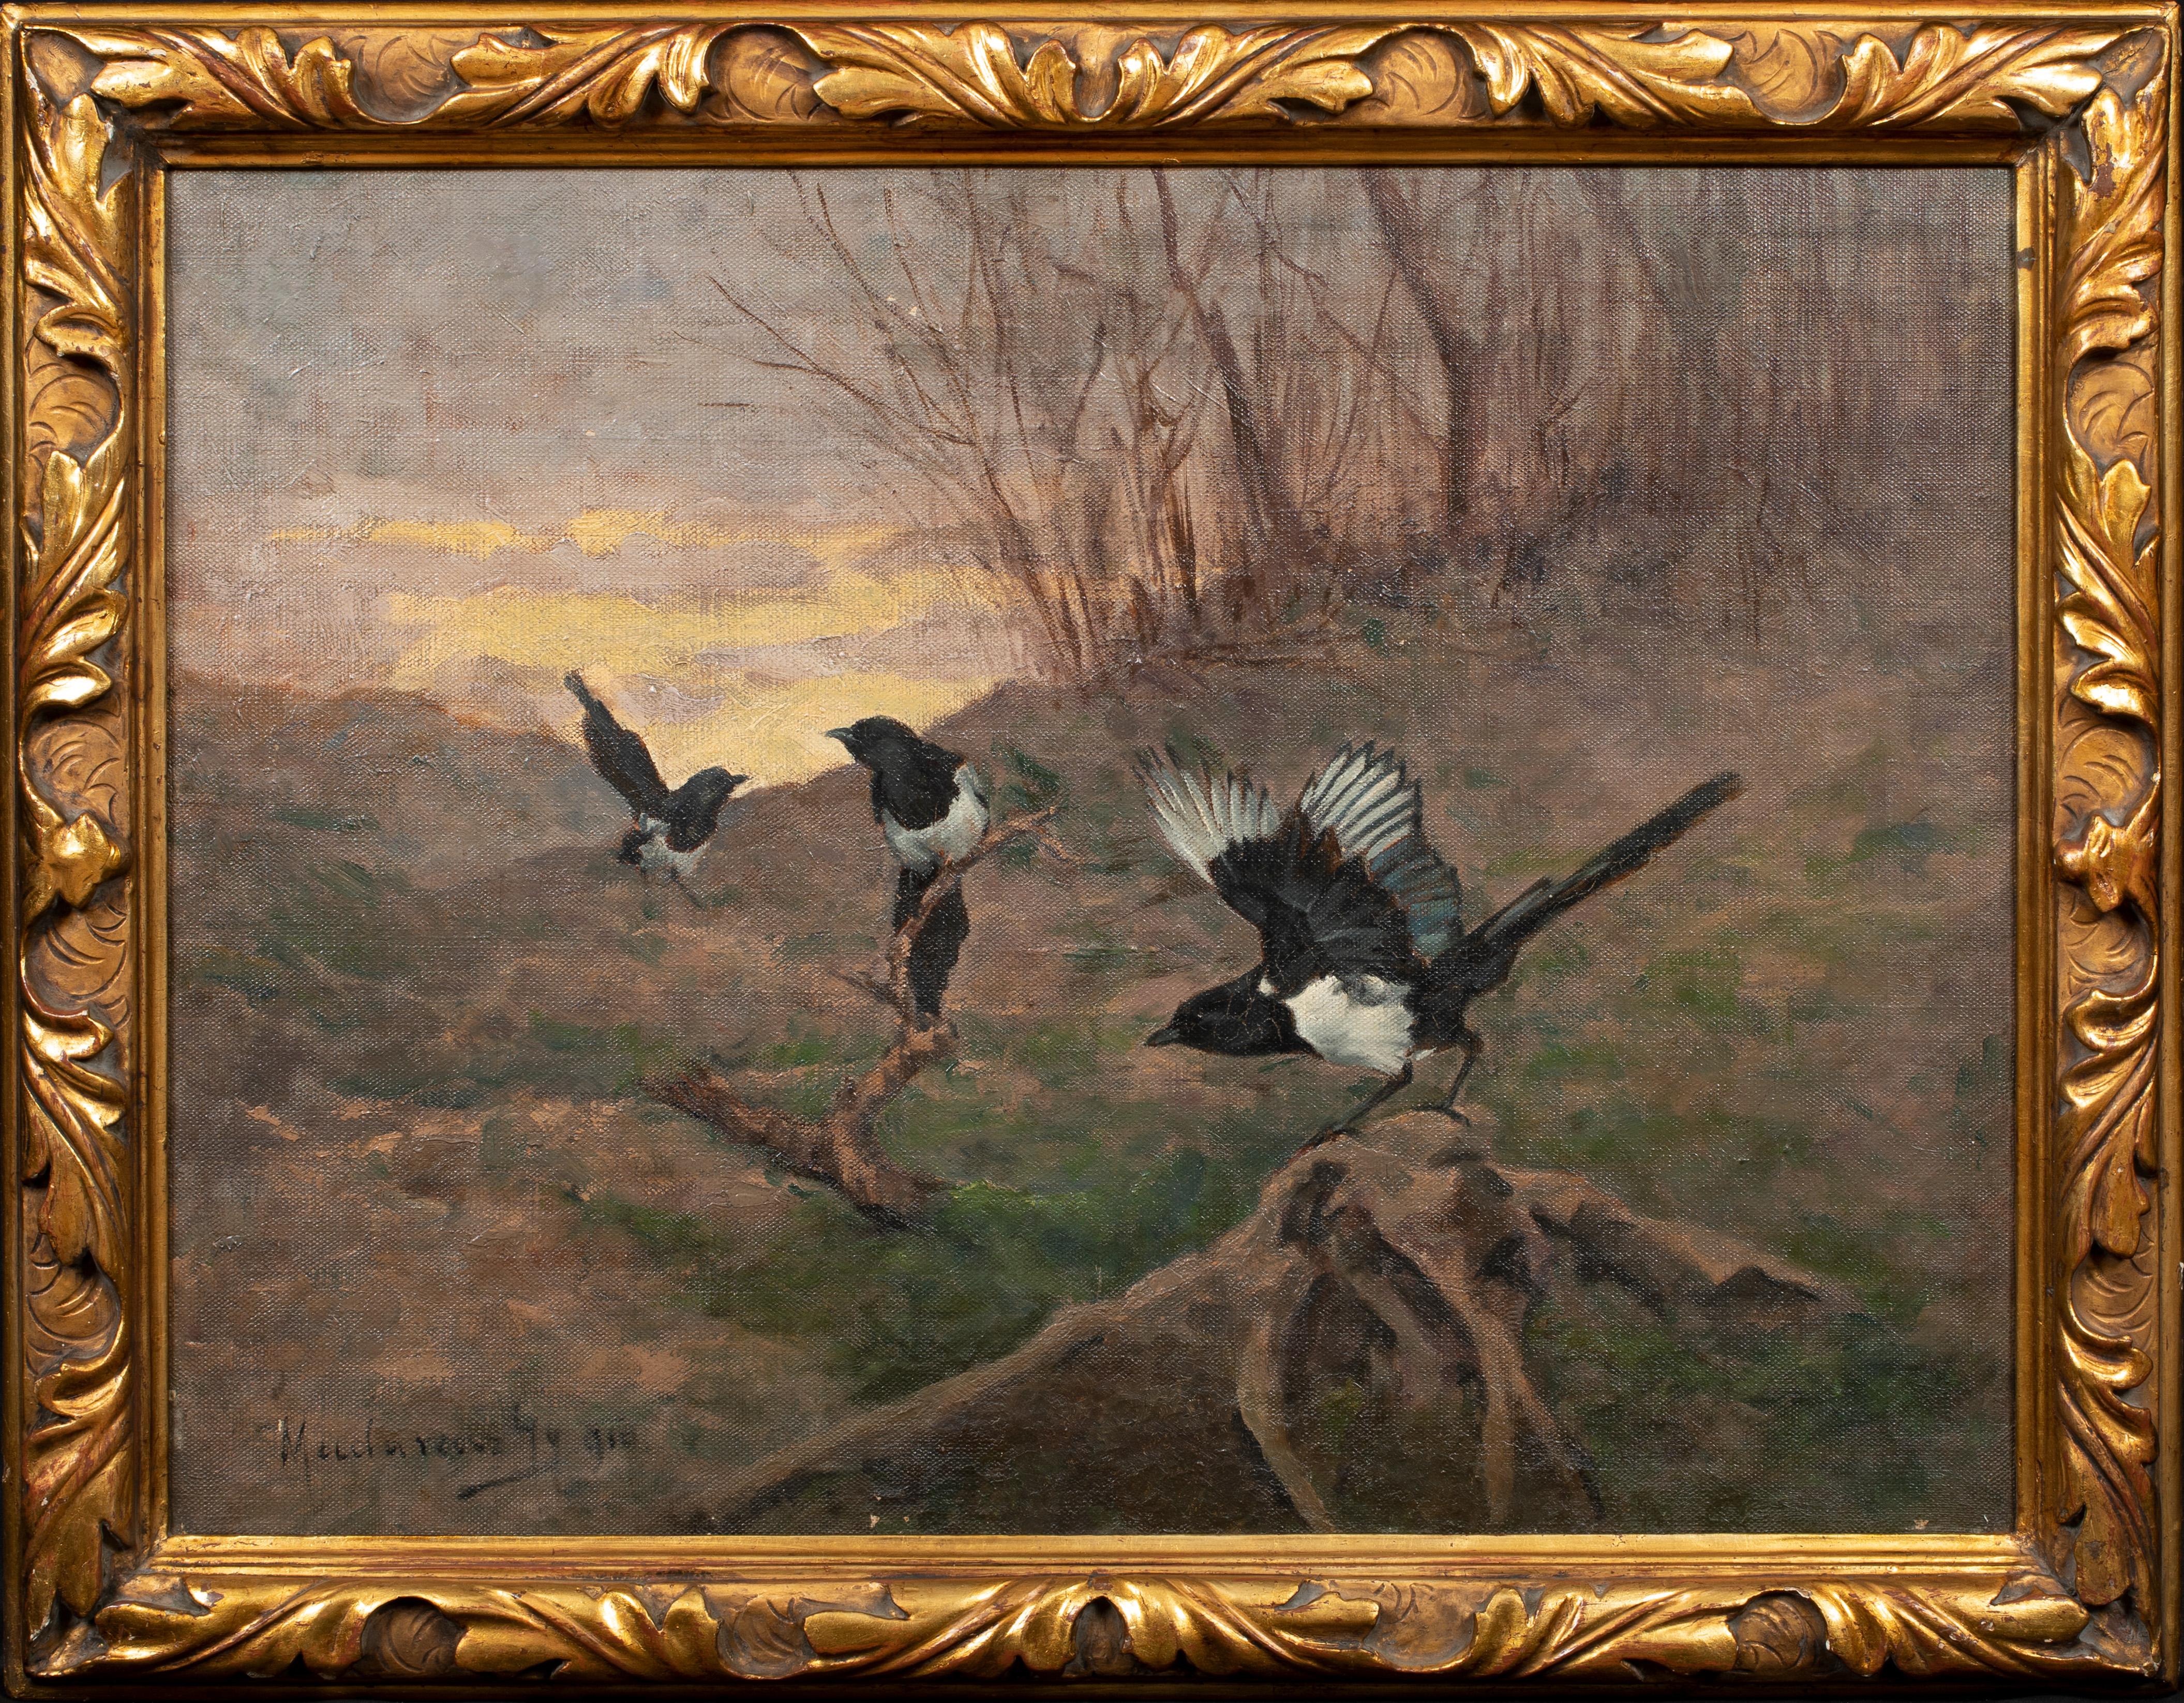 Unknown Portrait Painting - Study Of Magpies In A Landscape, circa 1900